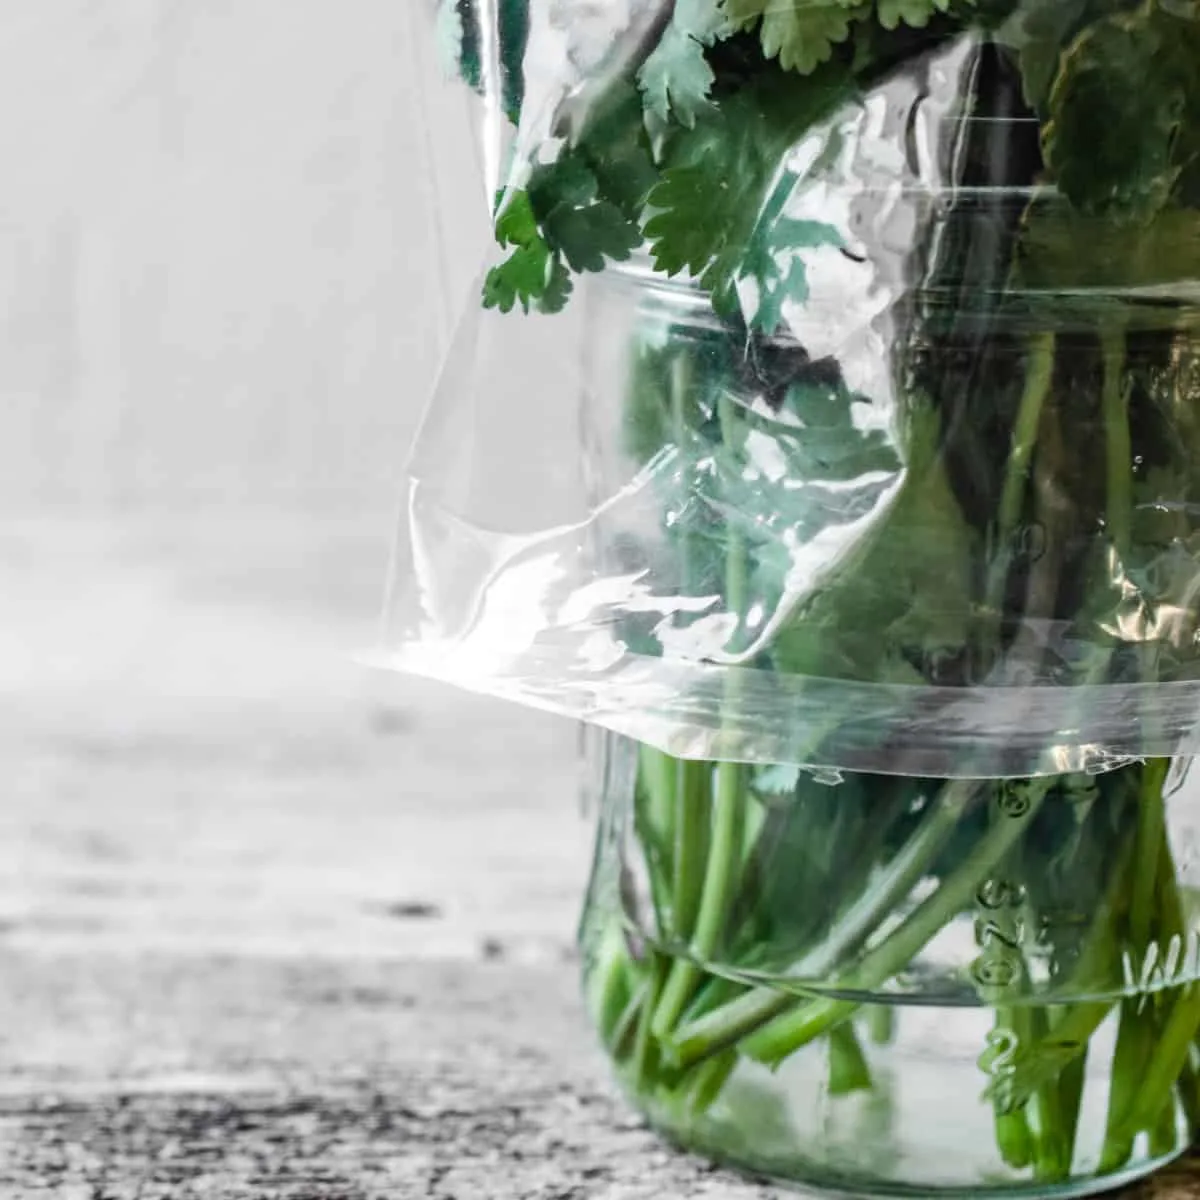 Cilantro stems in a jar with water, covered with a plastic bag.